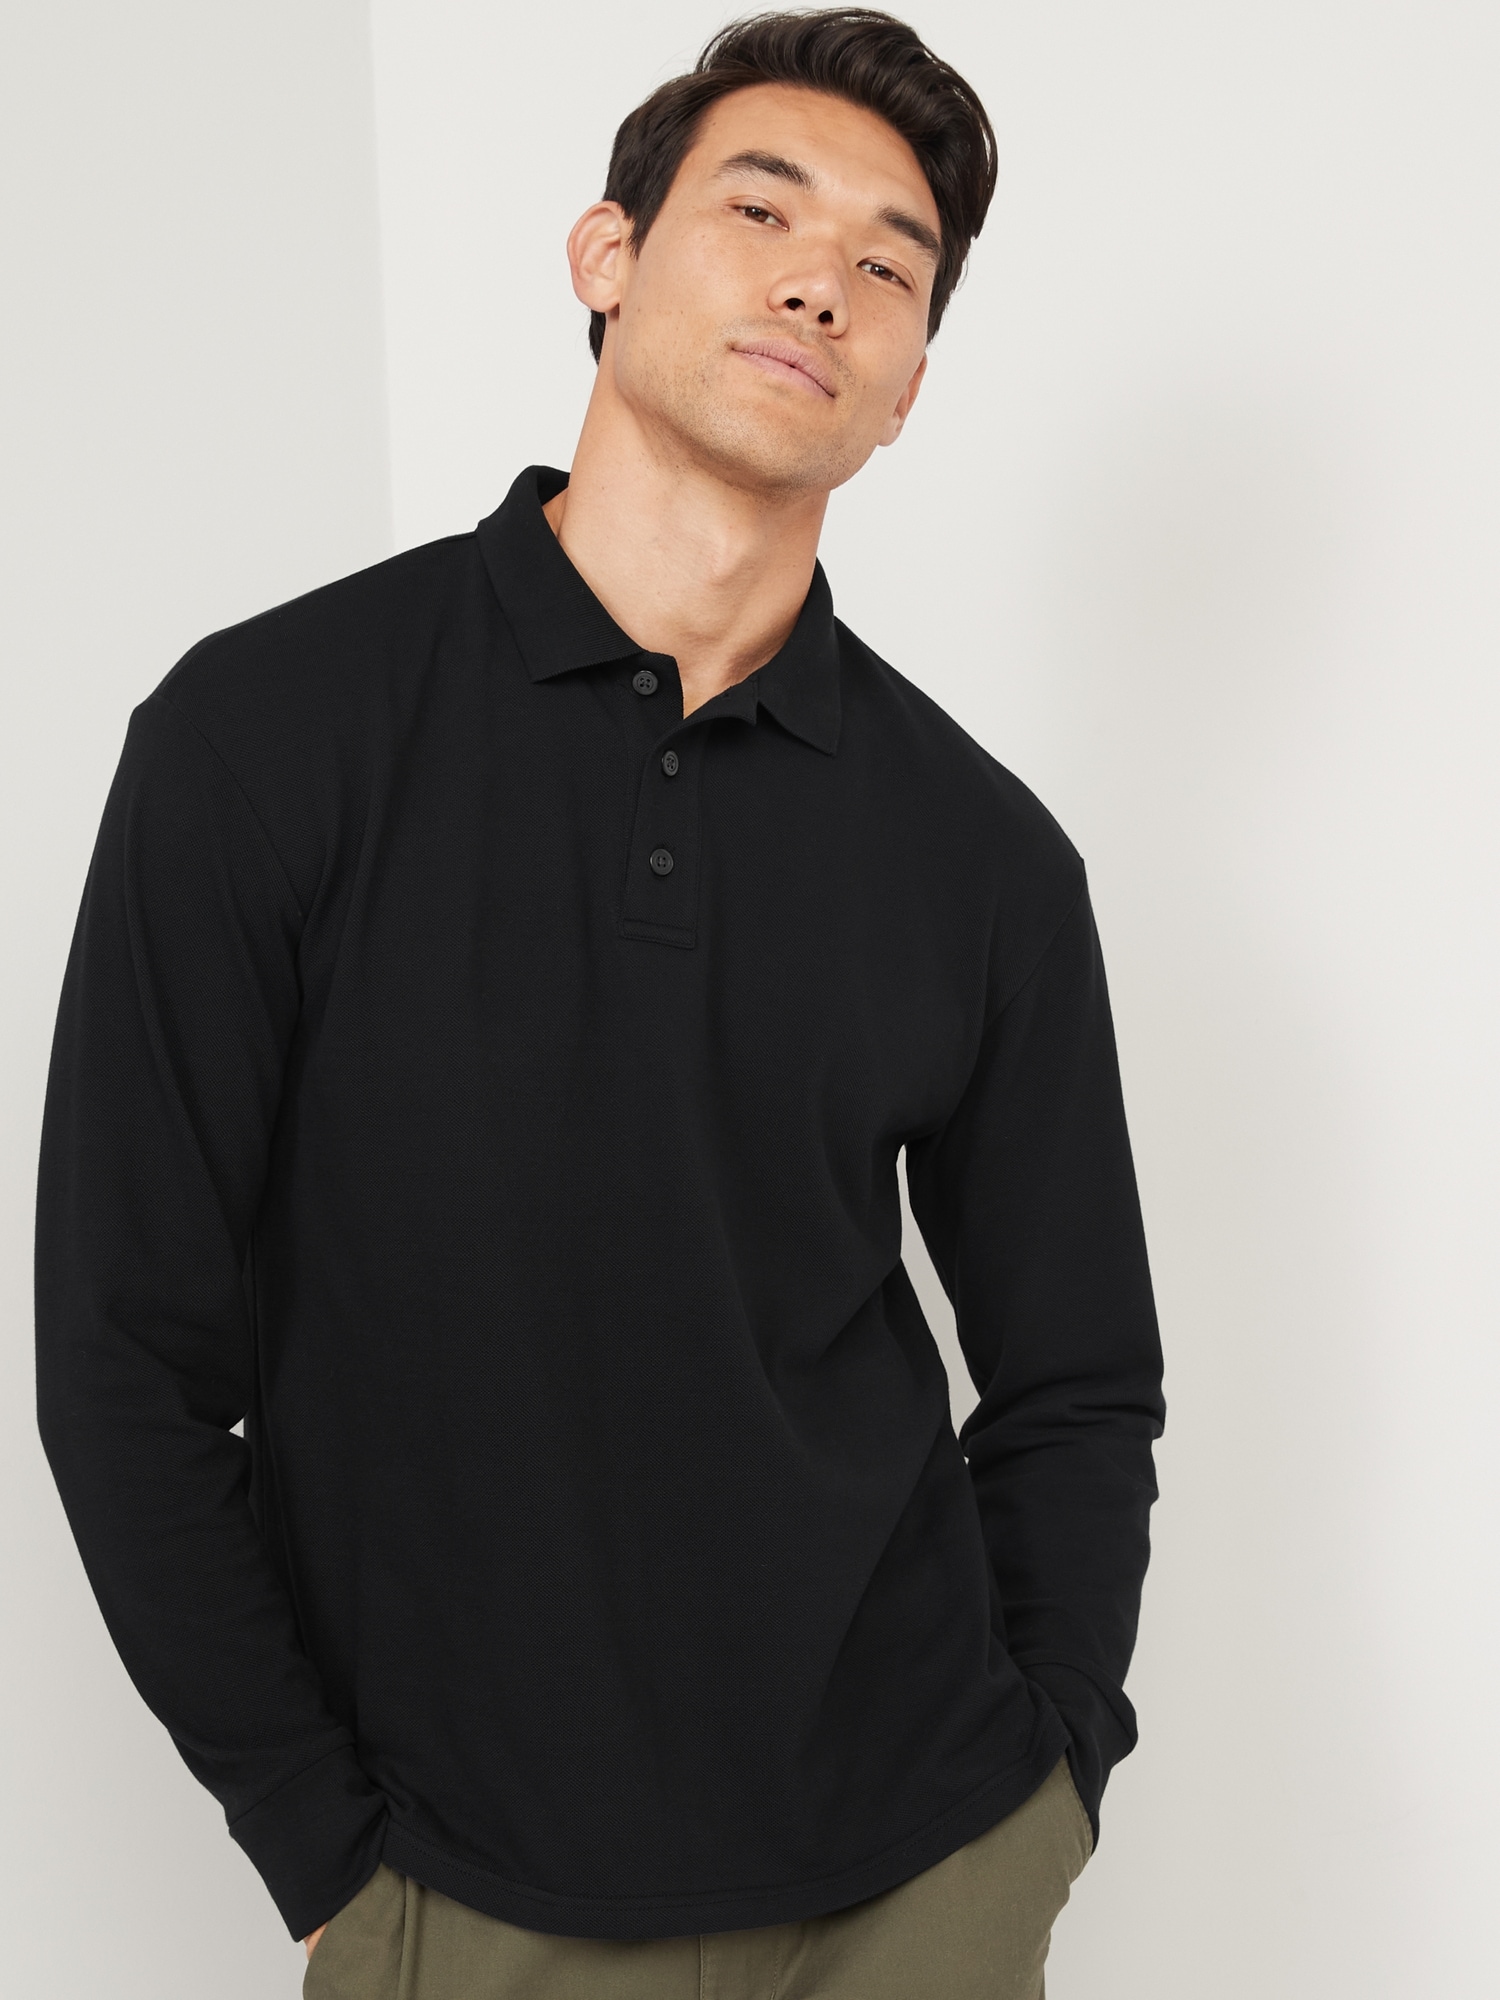 Long-Sleeve Classic Fit Pique Polo for Men | Old Navy